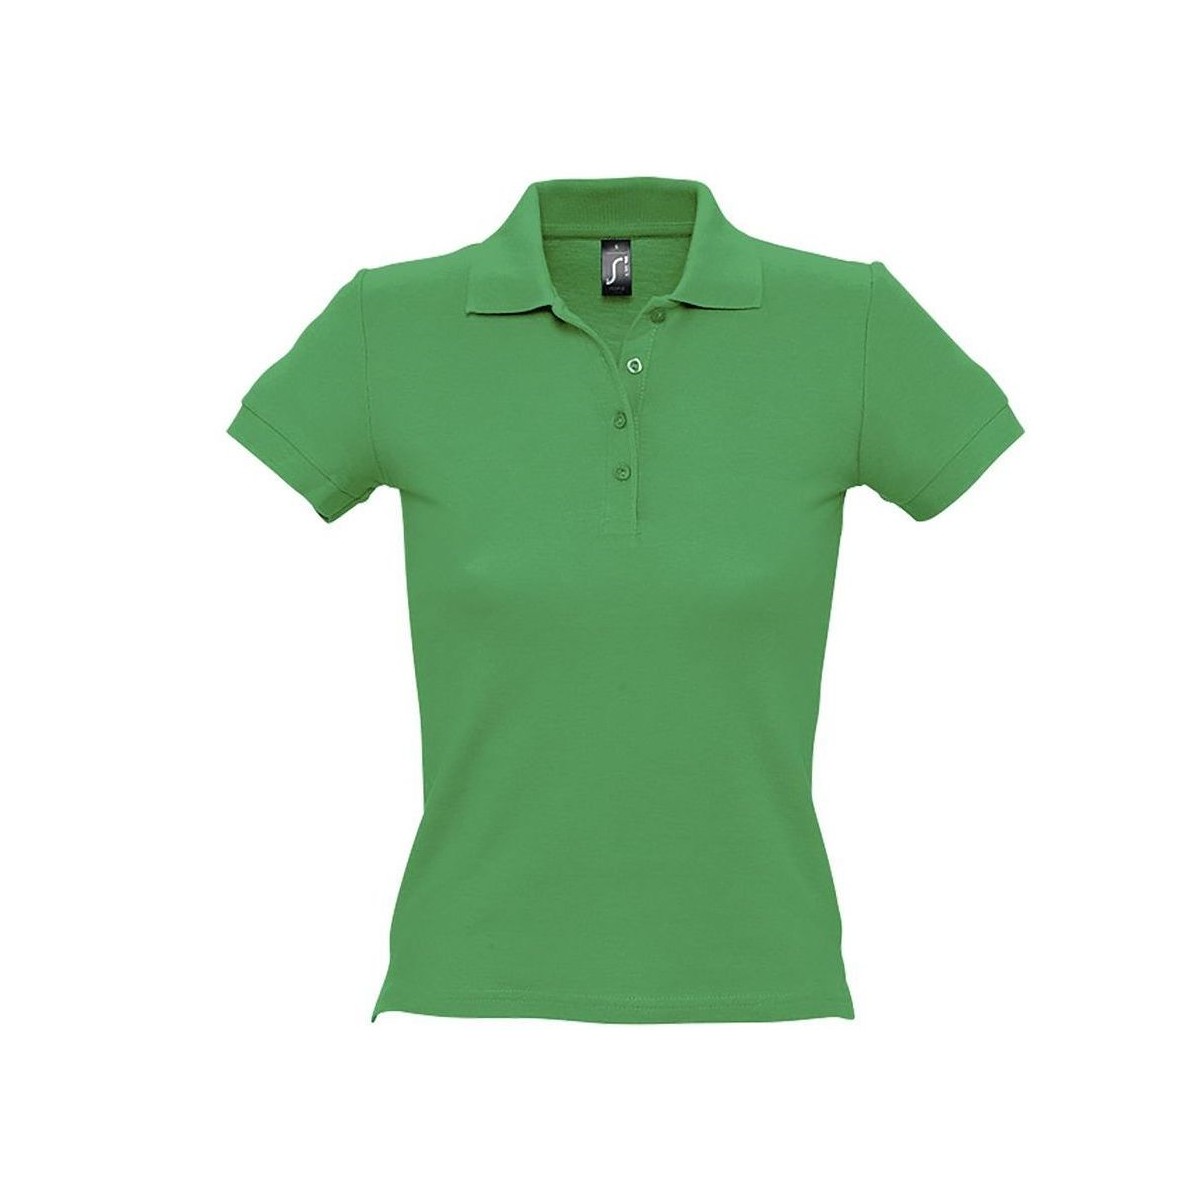 Textil Mulher Polos mangas curta Sols PEOPLE - POLO MUJER Verde